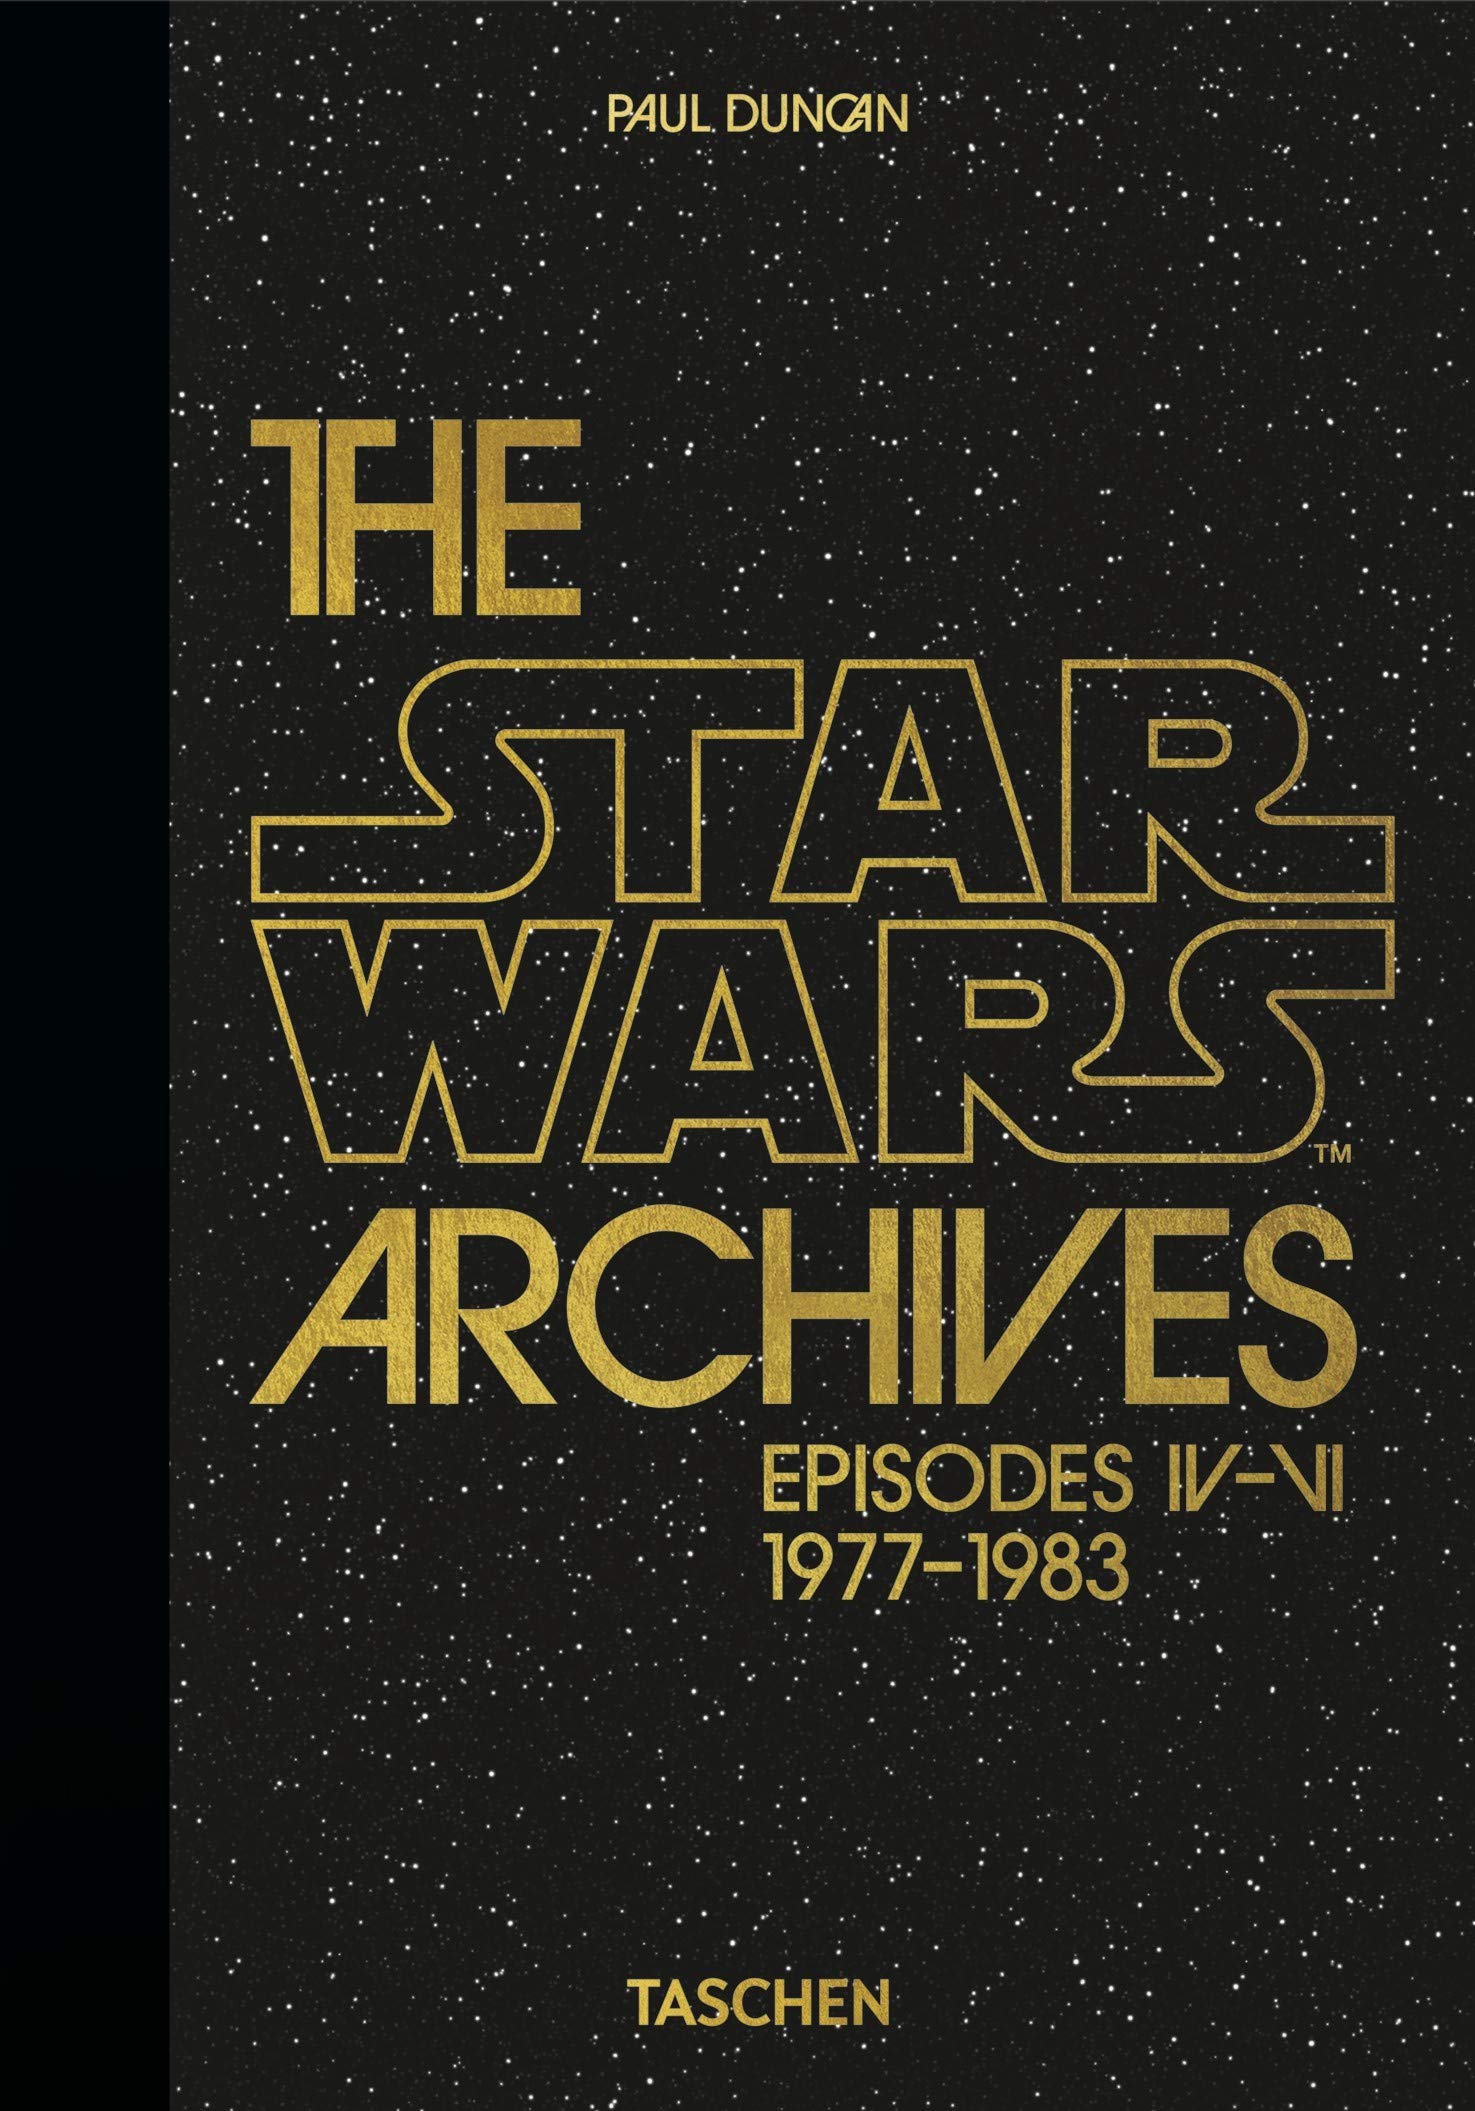 Star Wars Archives. 1977-1983 - 40th Anniversary Edition | Paul Duncan